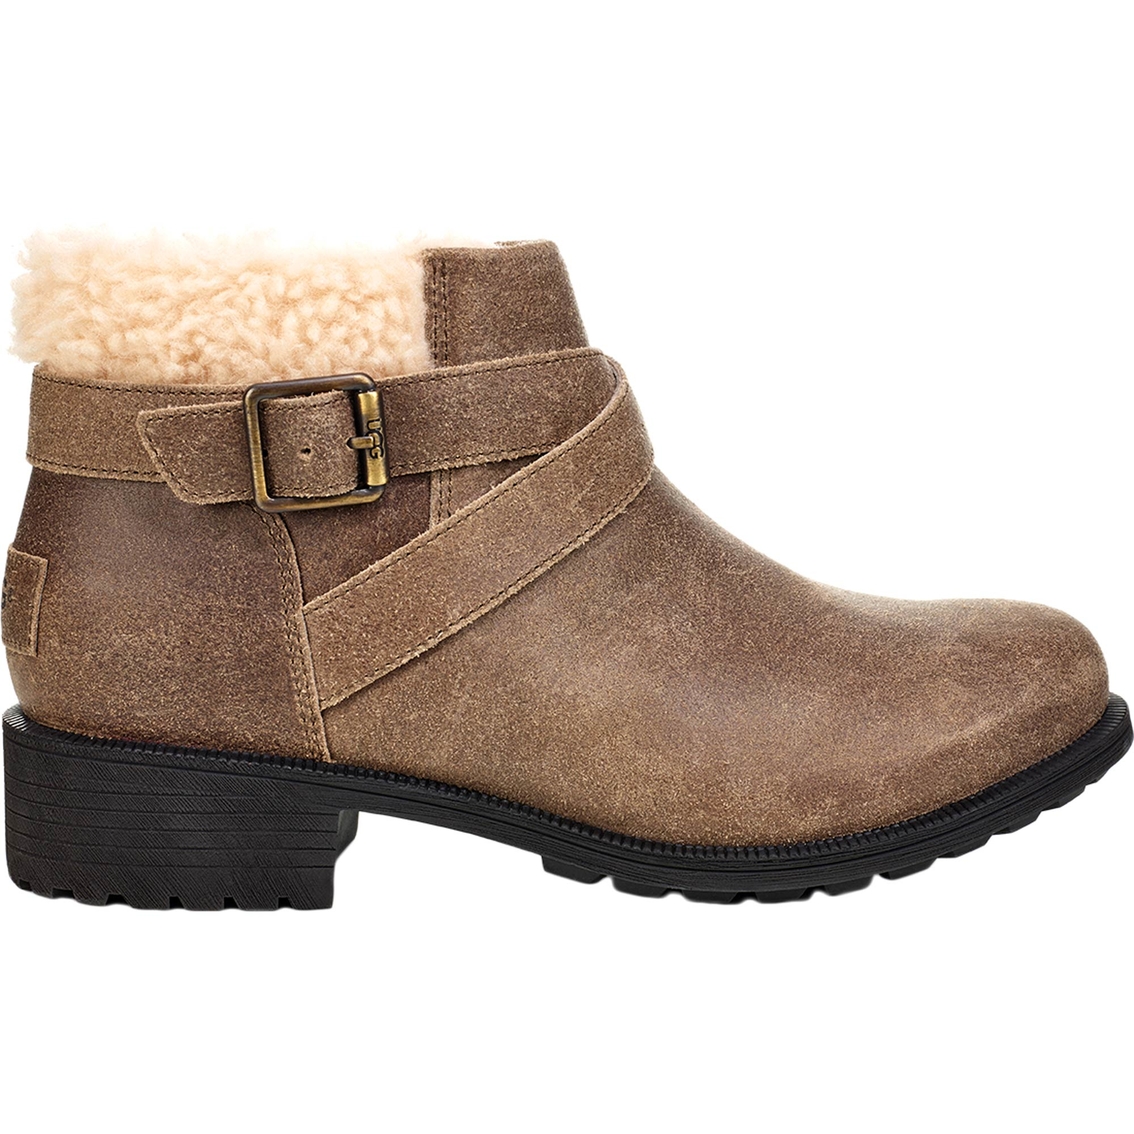 Ugg Benson Boots | Tall Boots | Shoes 